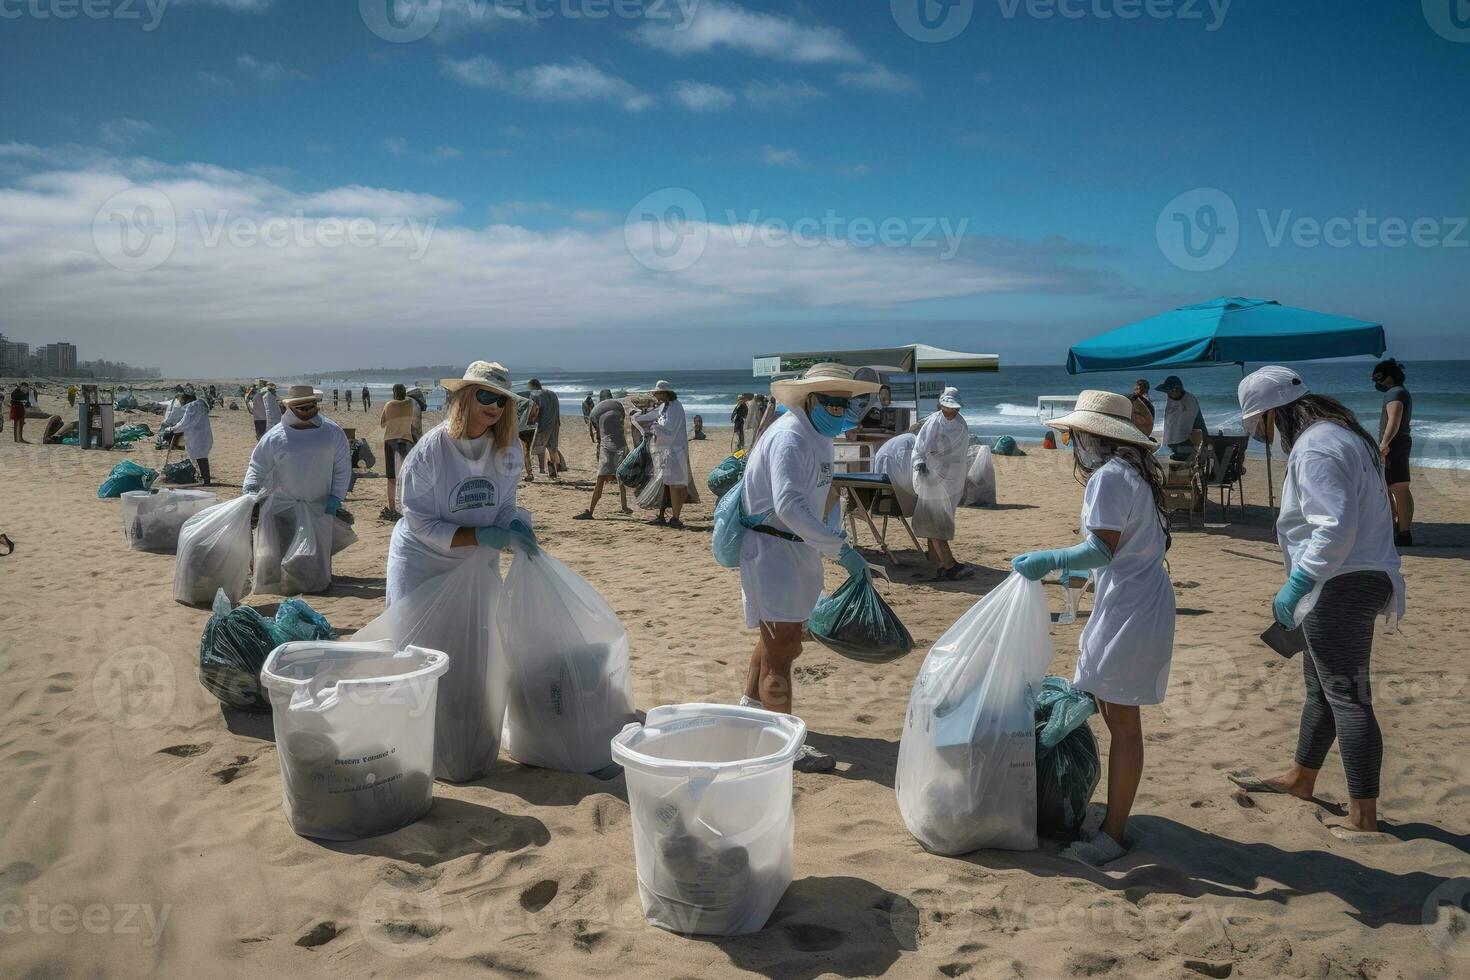 A group of volunteers wearing gloves and carrying reusable bags participate in a beach cleanup event. They are collecting plastic waste, including bottles, bags, and other debris. Generative AI photo